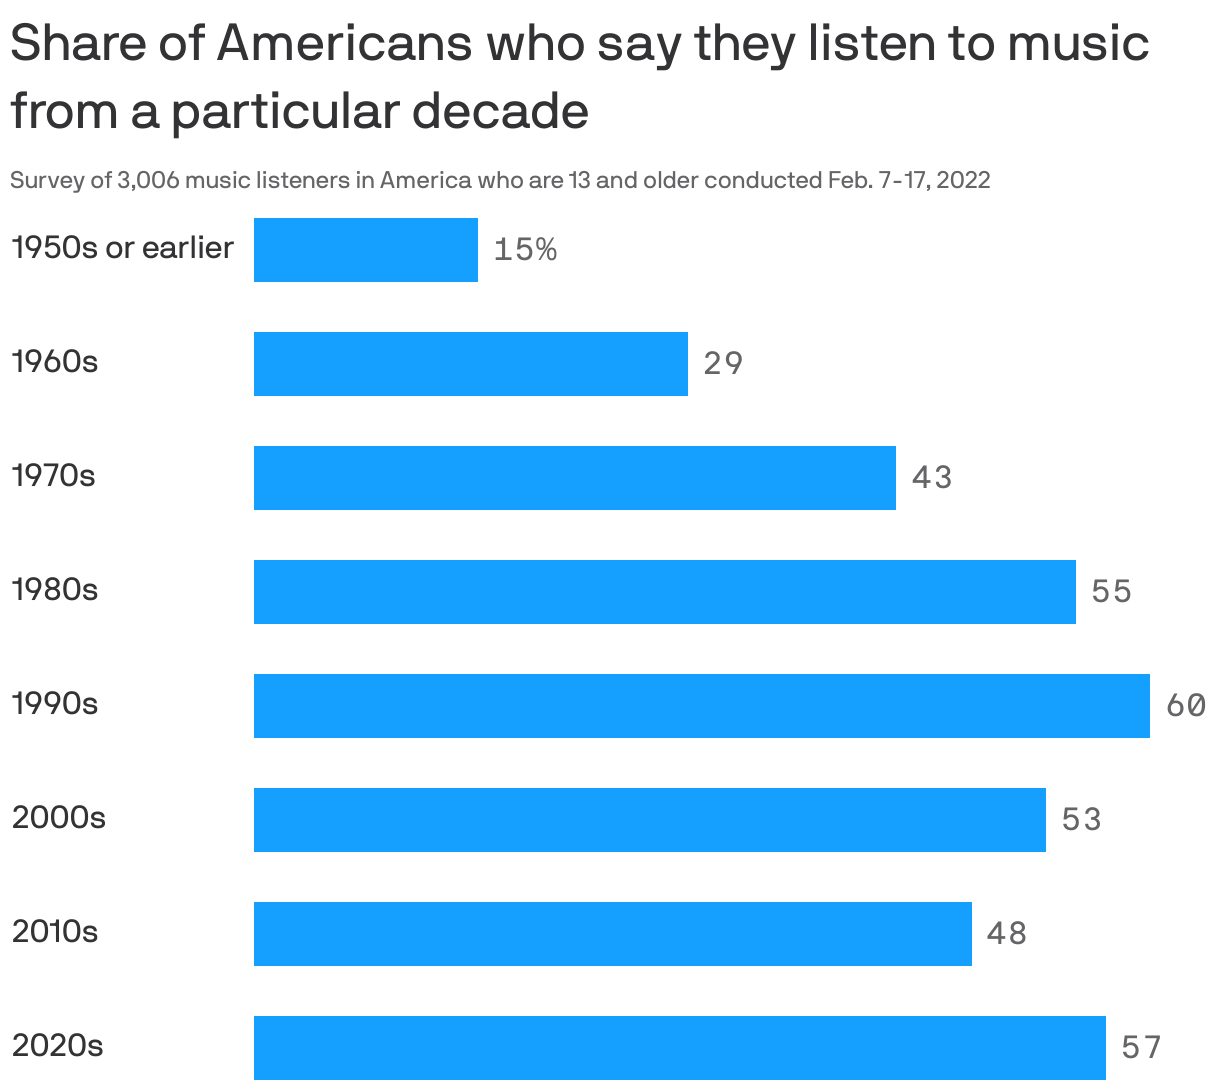 Share of Americans who say they listen to music from a particular decade